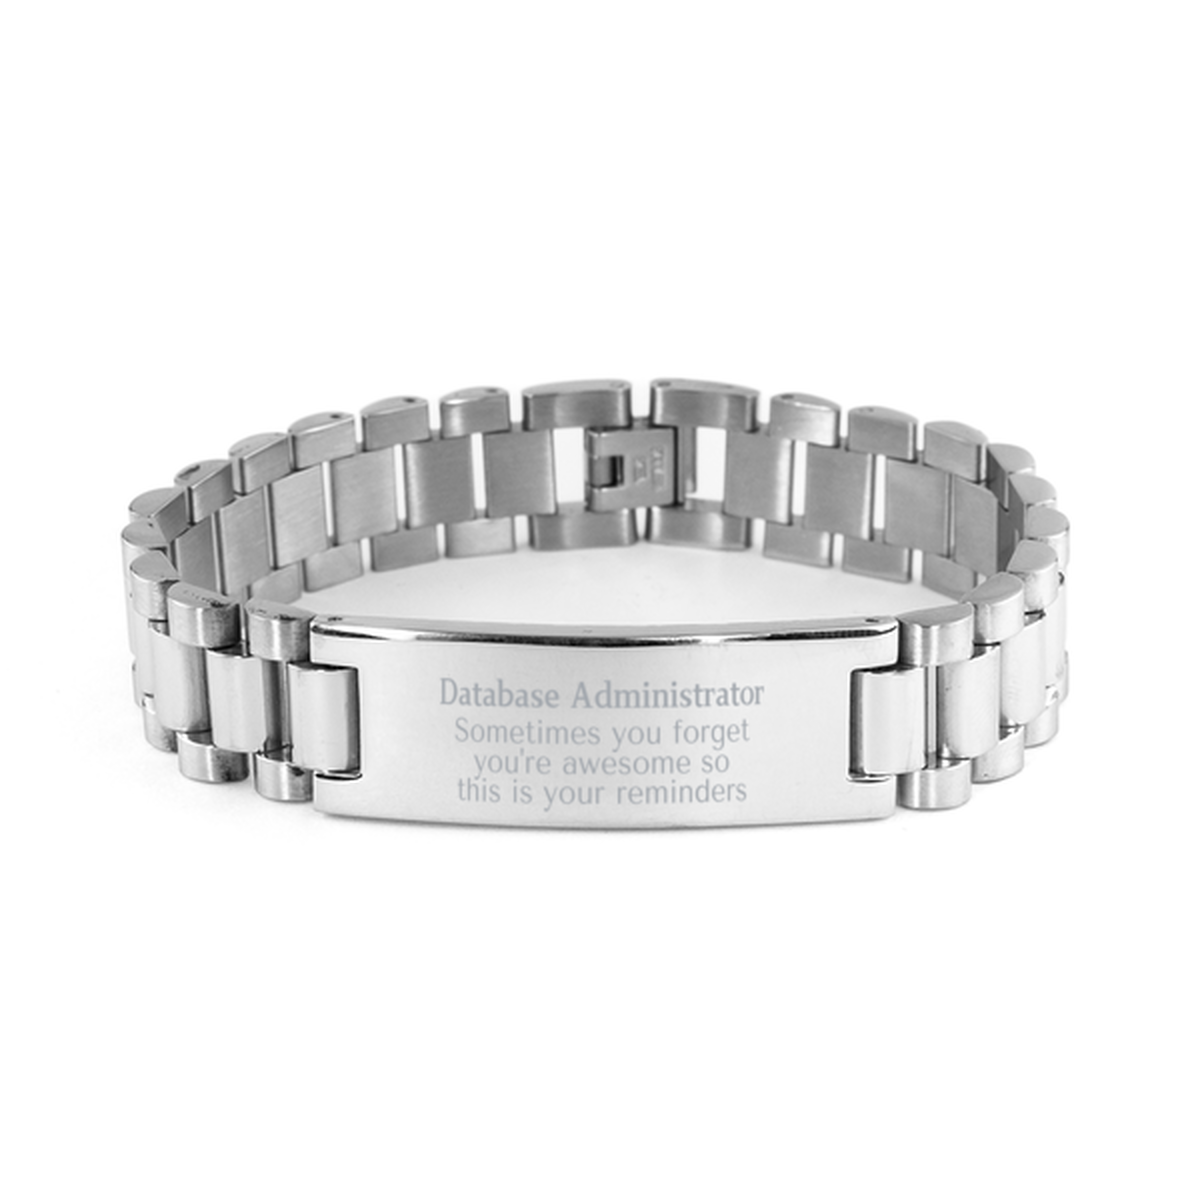 Sentimental Database Administrator Ladder Stainless Steel Bracelet, Database Administrator Sometimes you forget you're awesome so this is your reminders, Graduation Christmas Birthday Gifts for Database Administrator, Men, Women, Coworkers